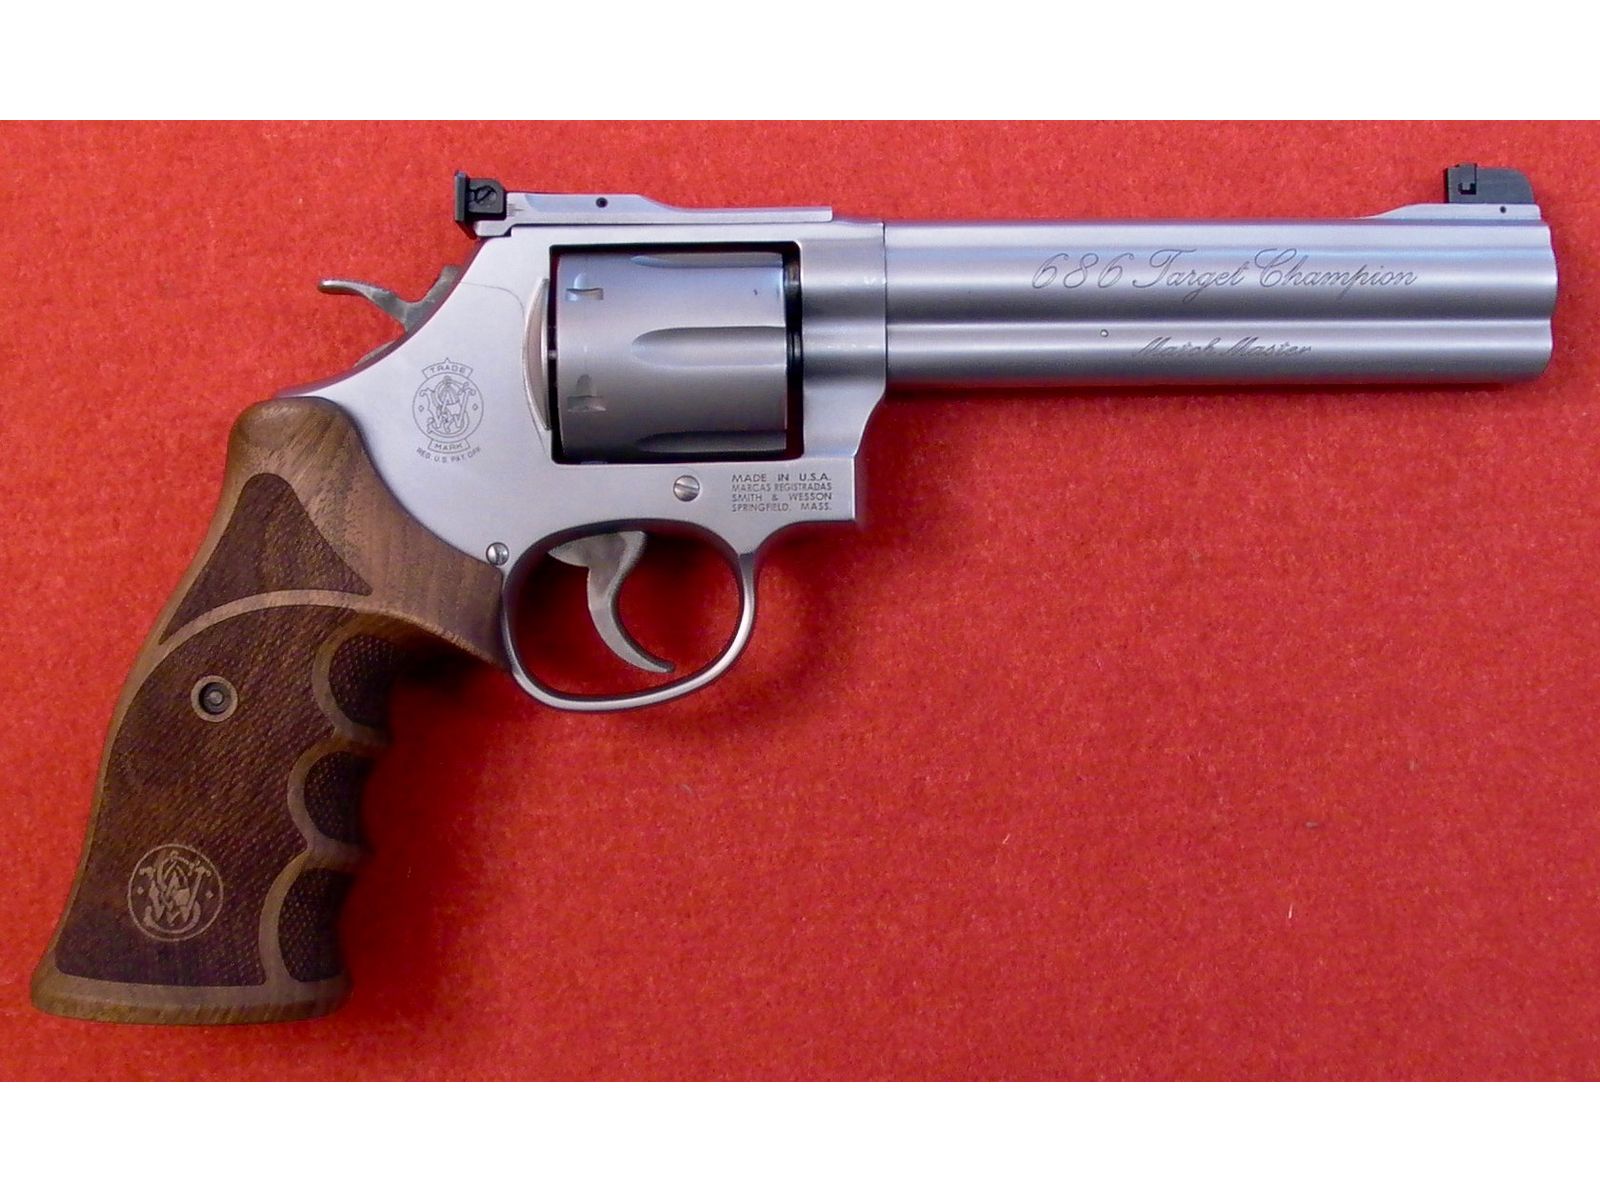 Smith & Wesson Mod. 686 Target Champion Match Master